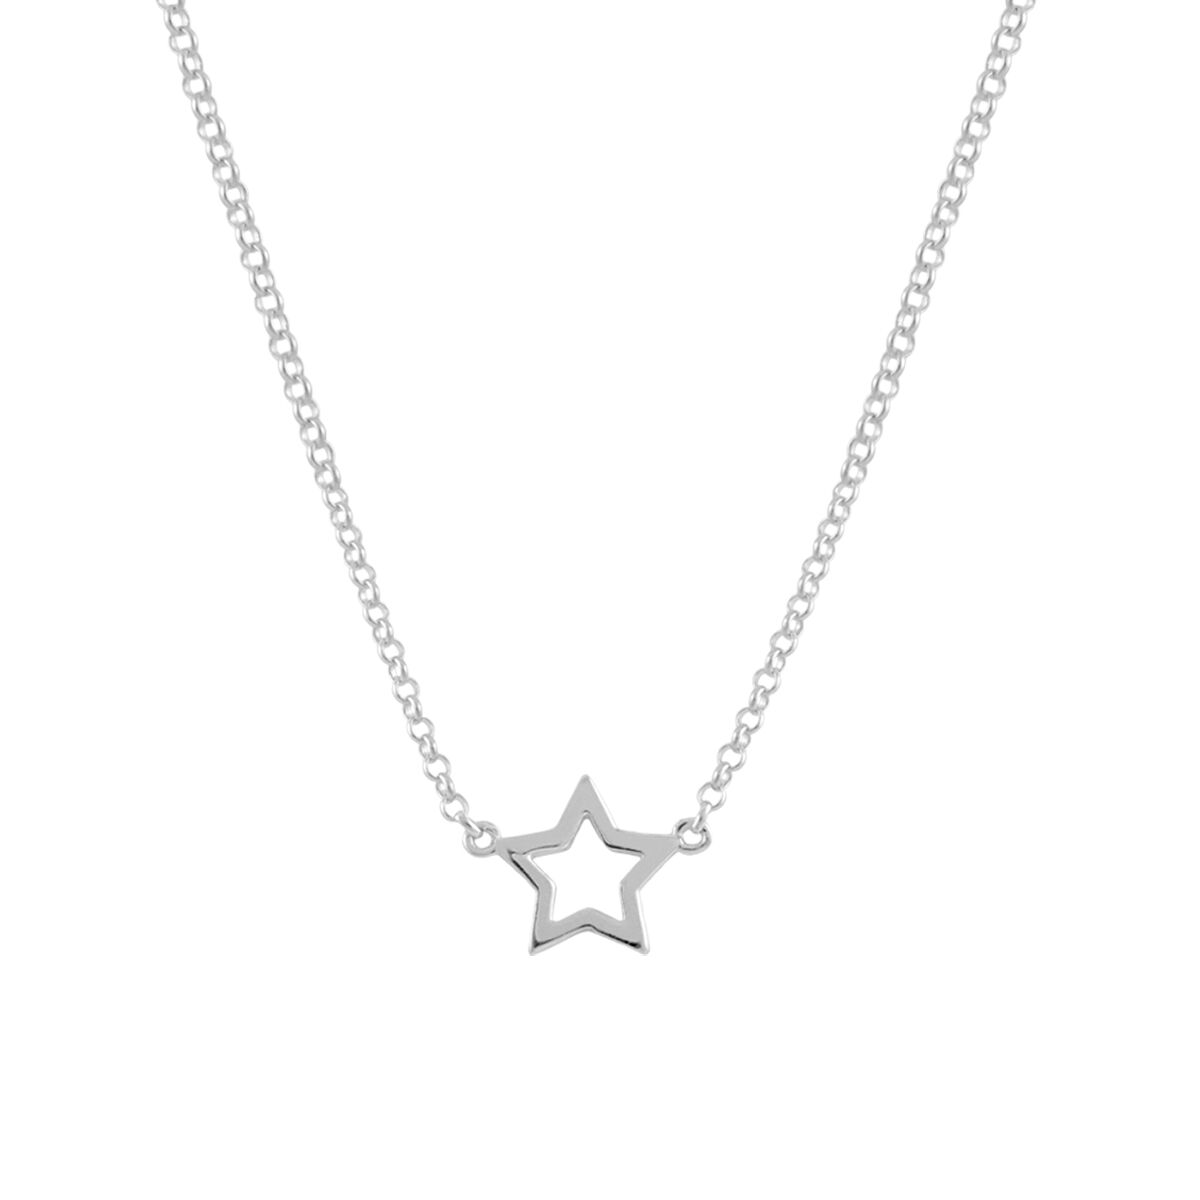 Silver hollow star necklace , J00659-01, hi-res